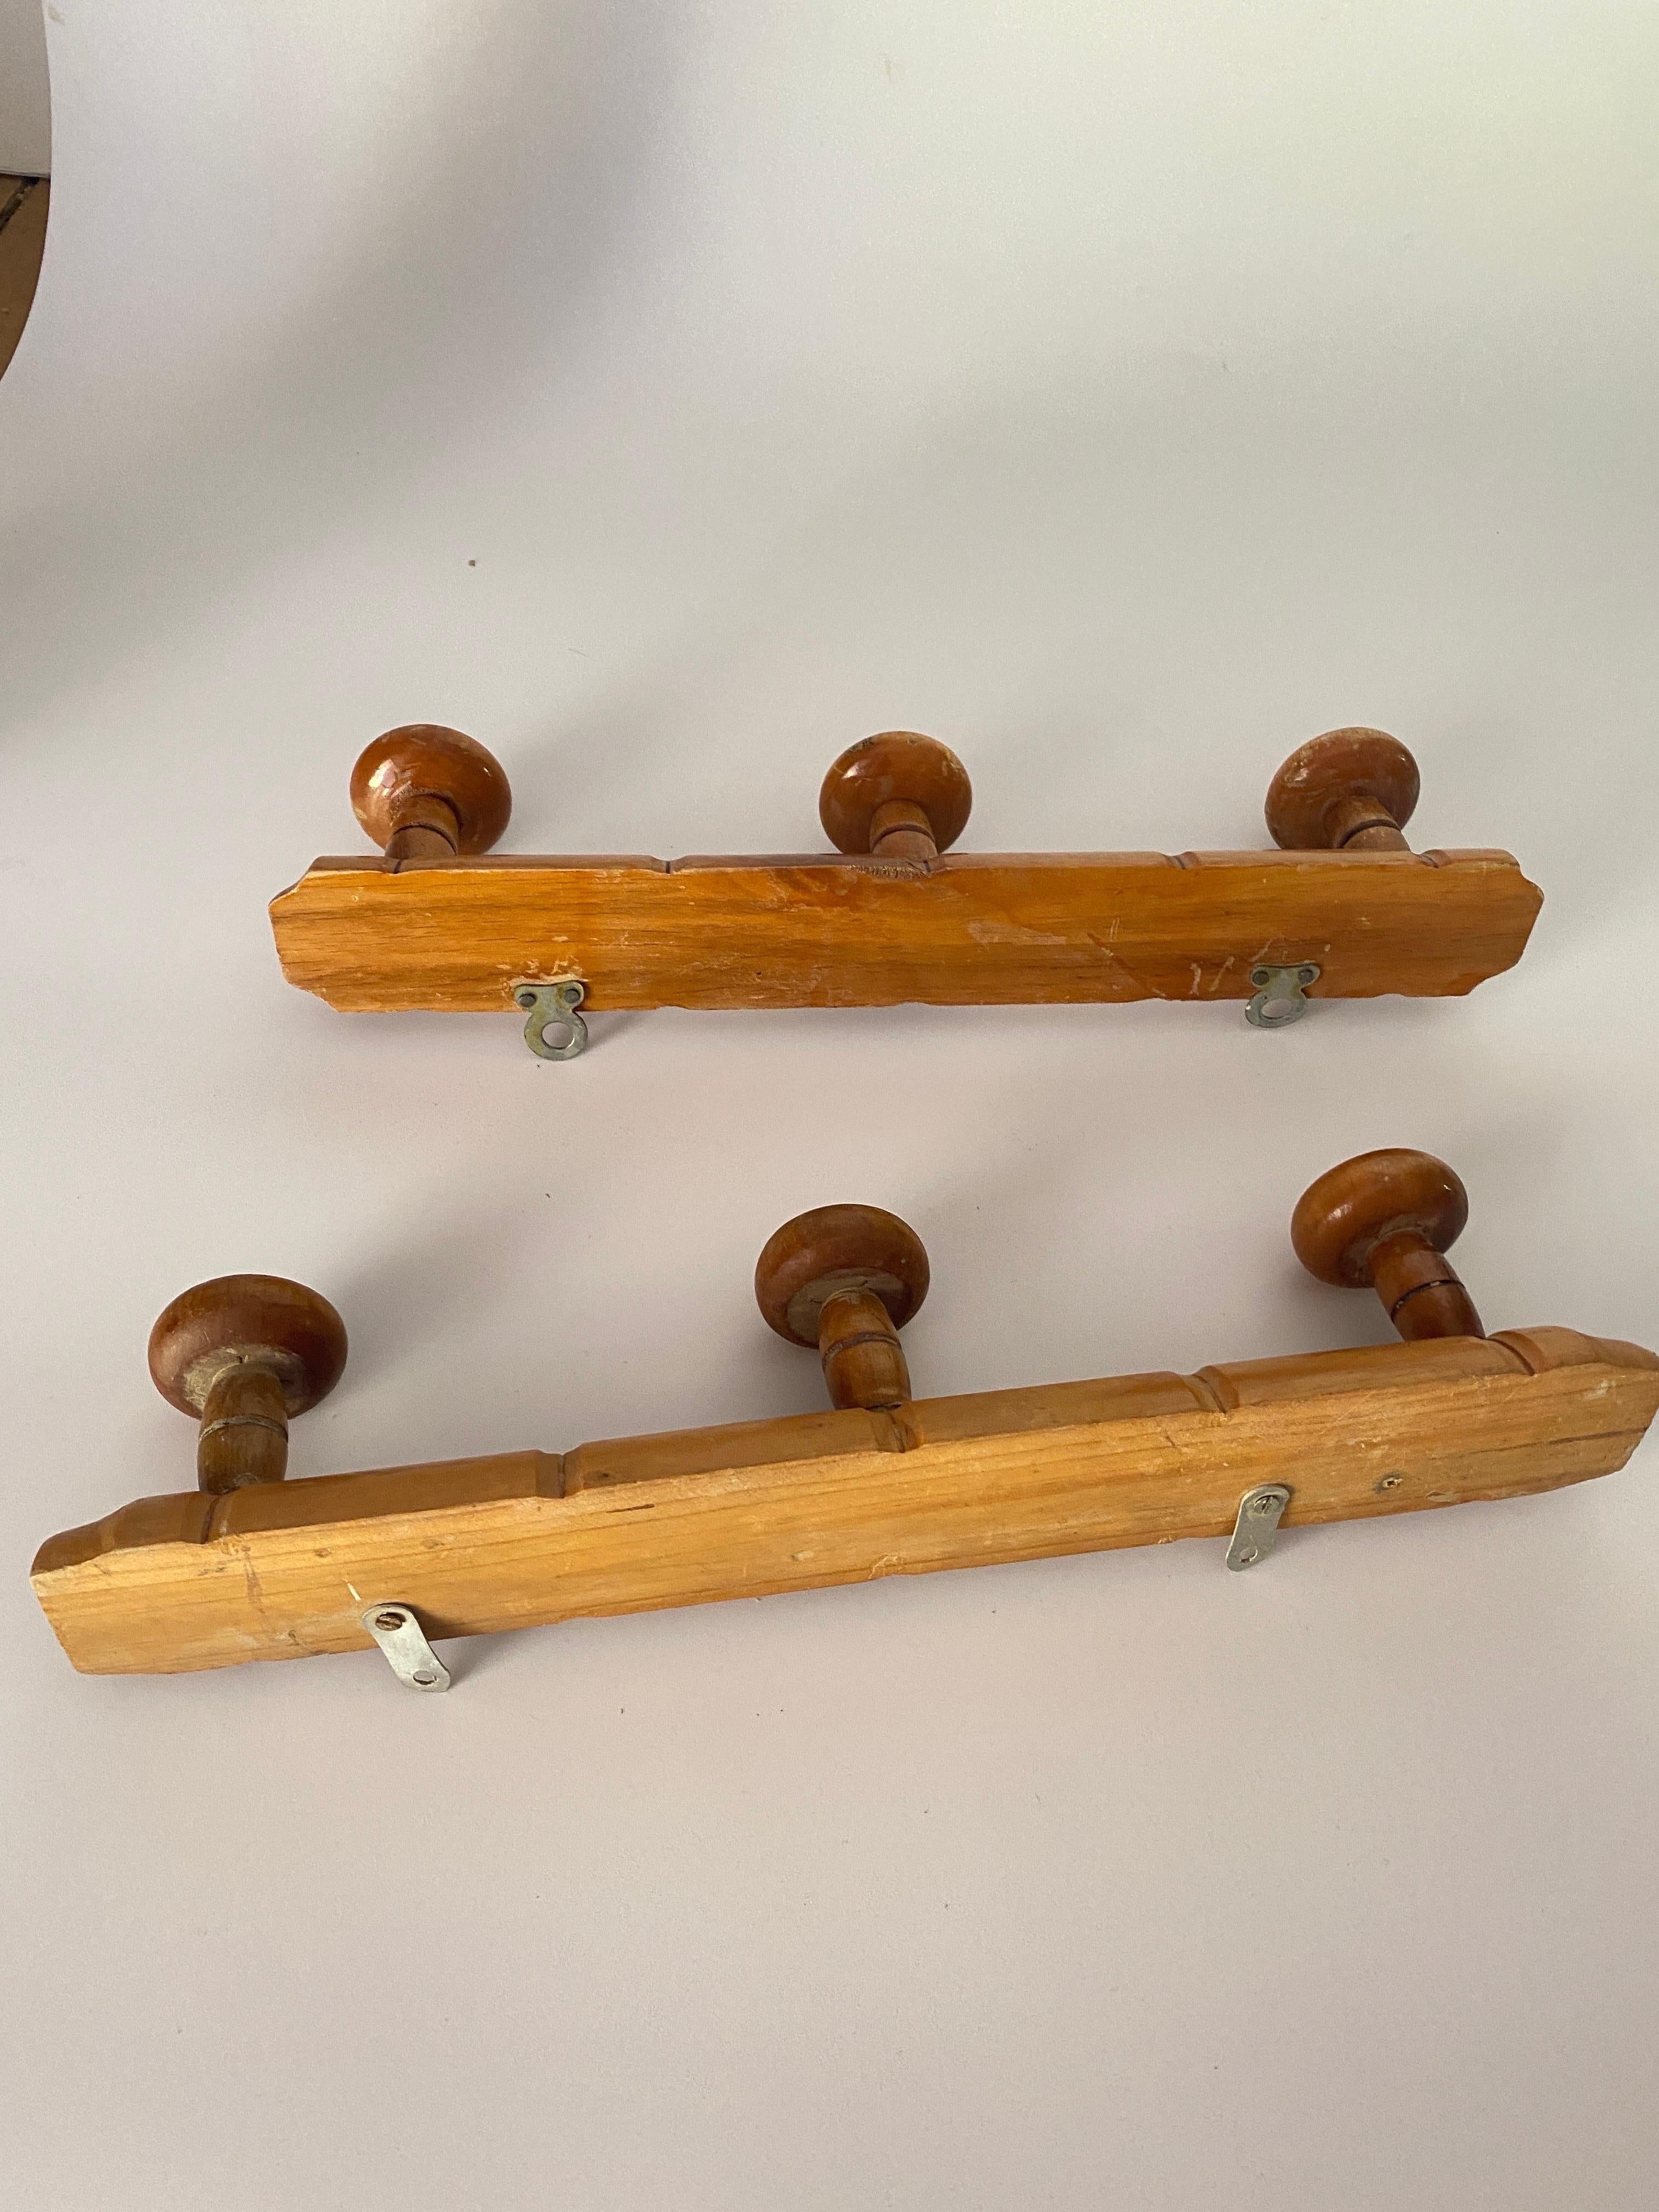 An early 20th century French maple pair of coat or hat rack, carved to mimic bamboo. Perfect for having hats, coats, belts, and scarves, or brooms and dustpans in our utility closet.
 